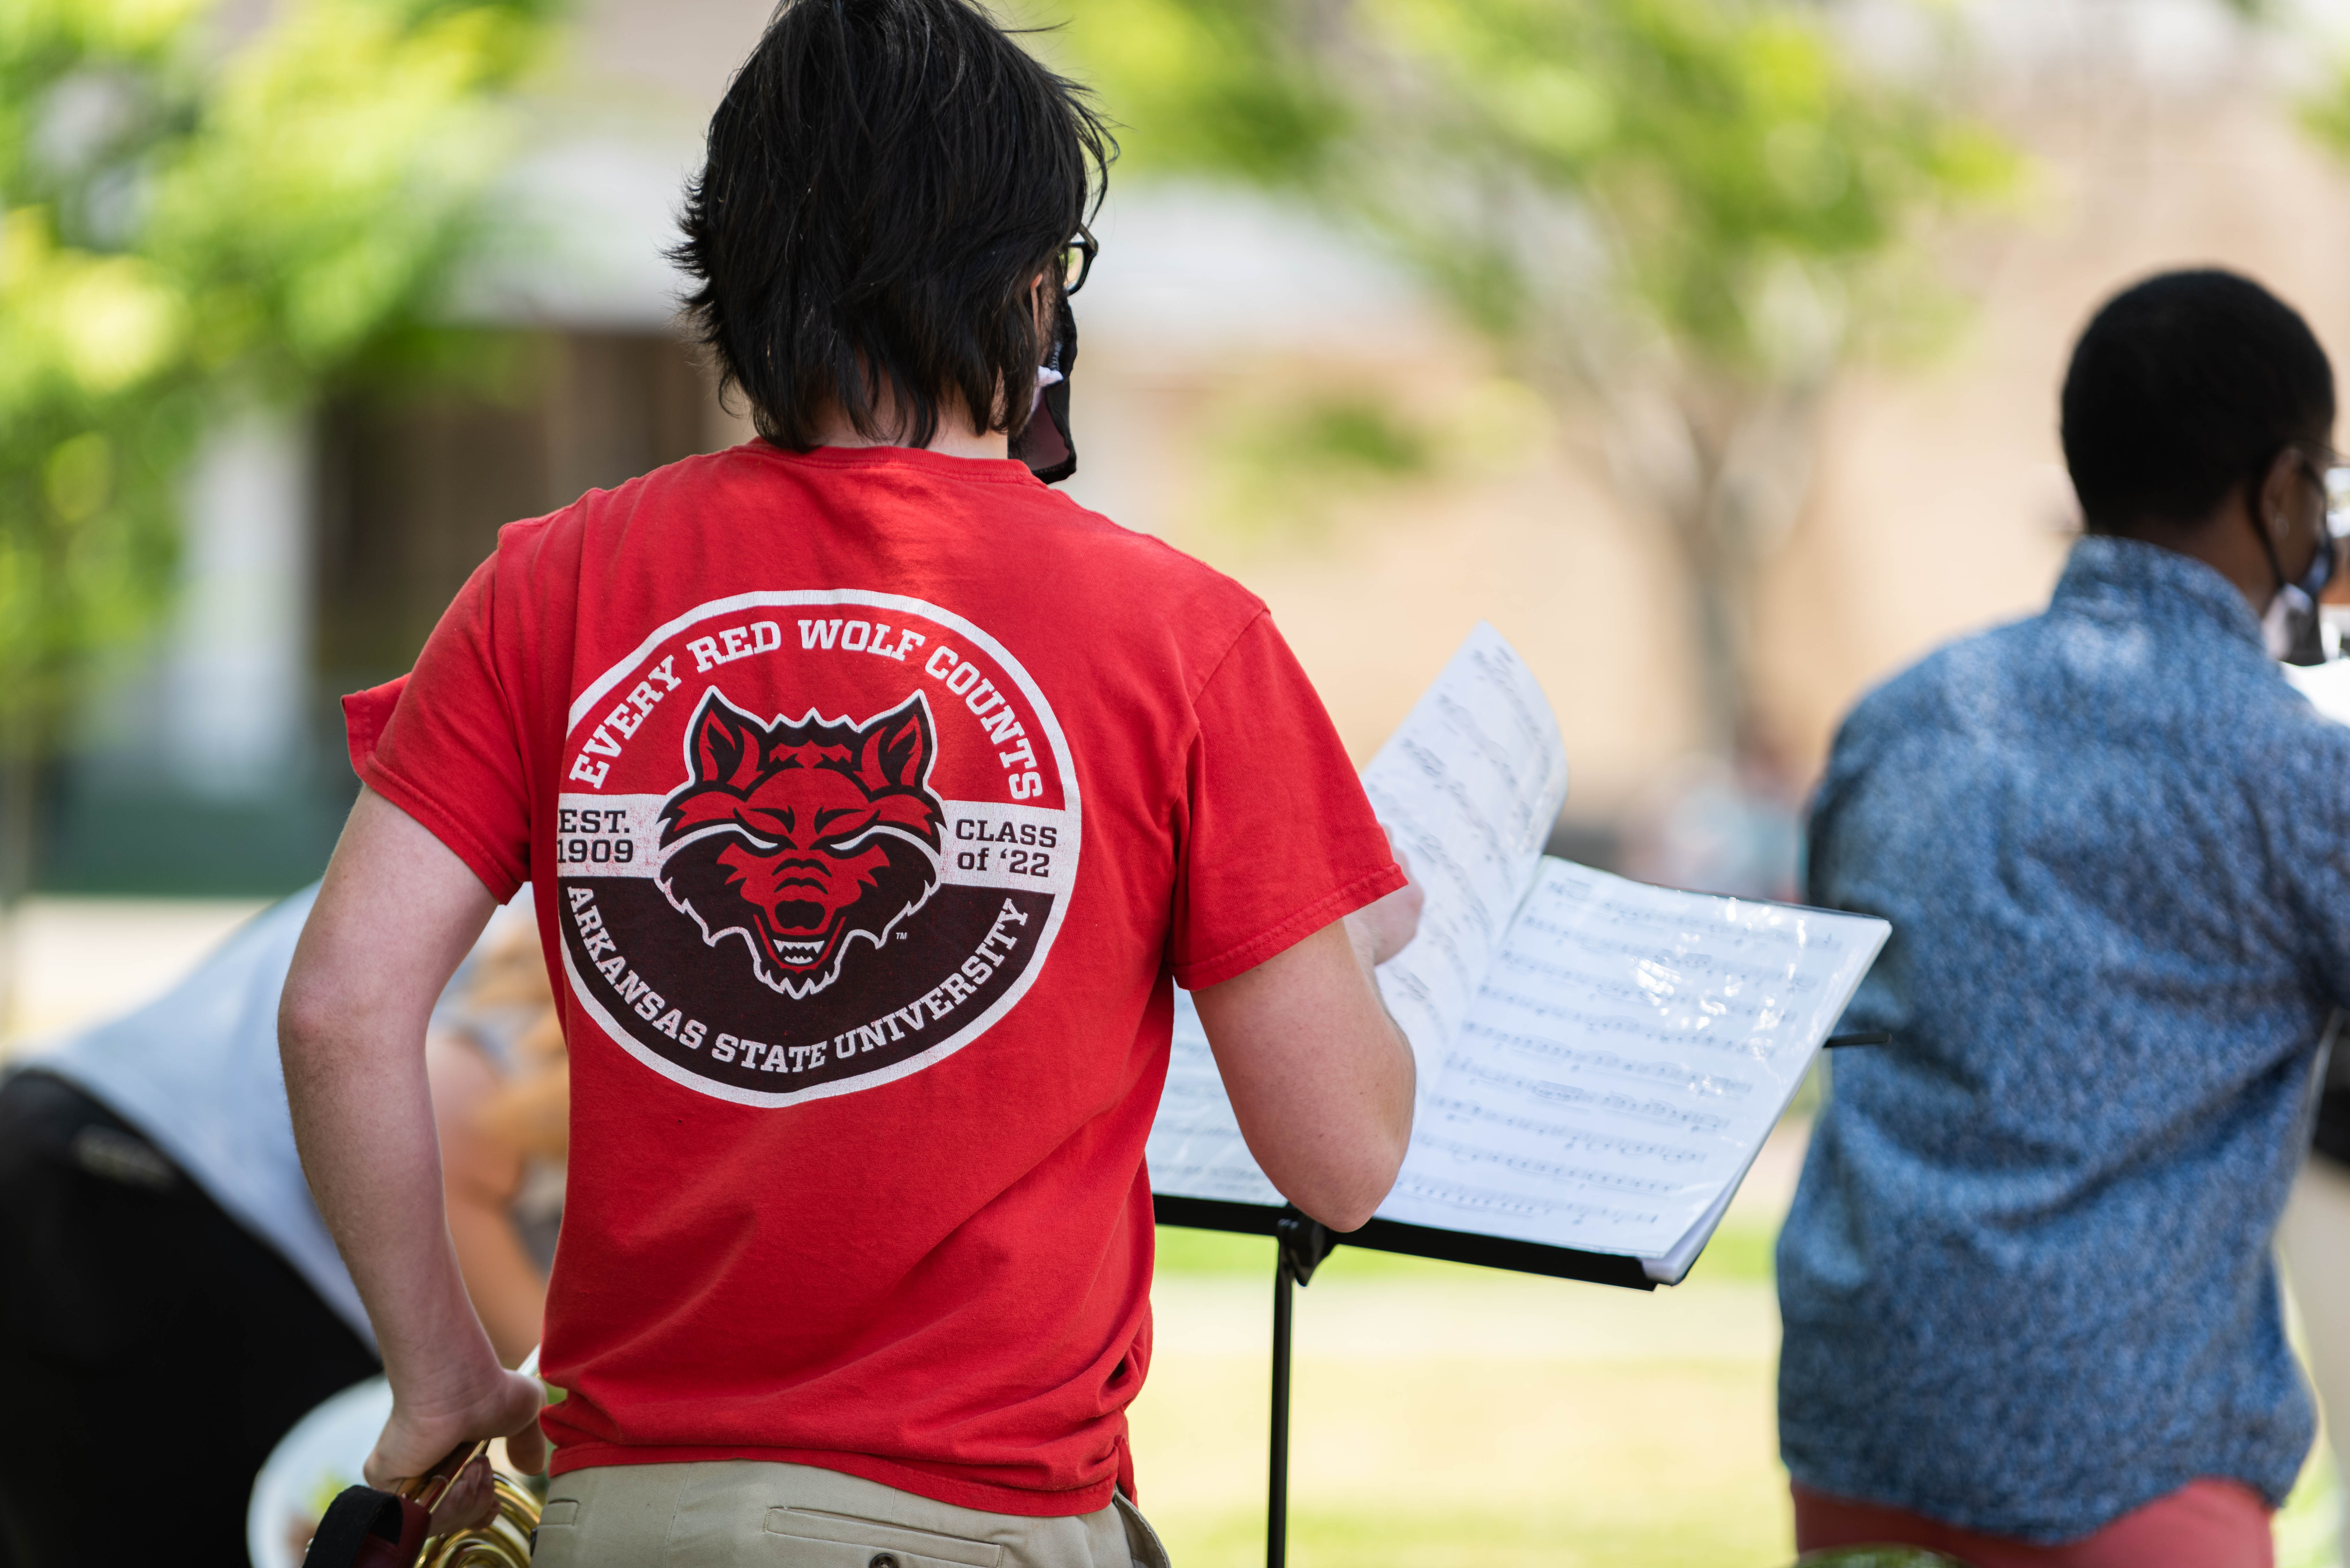 Looking at the backs of two french horn students about to perform outside.  One is turning a page of music on a stand, wearing an Every Red Wolf Counts shirt.